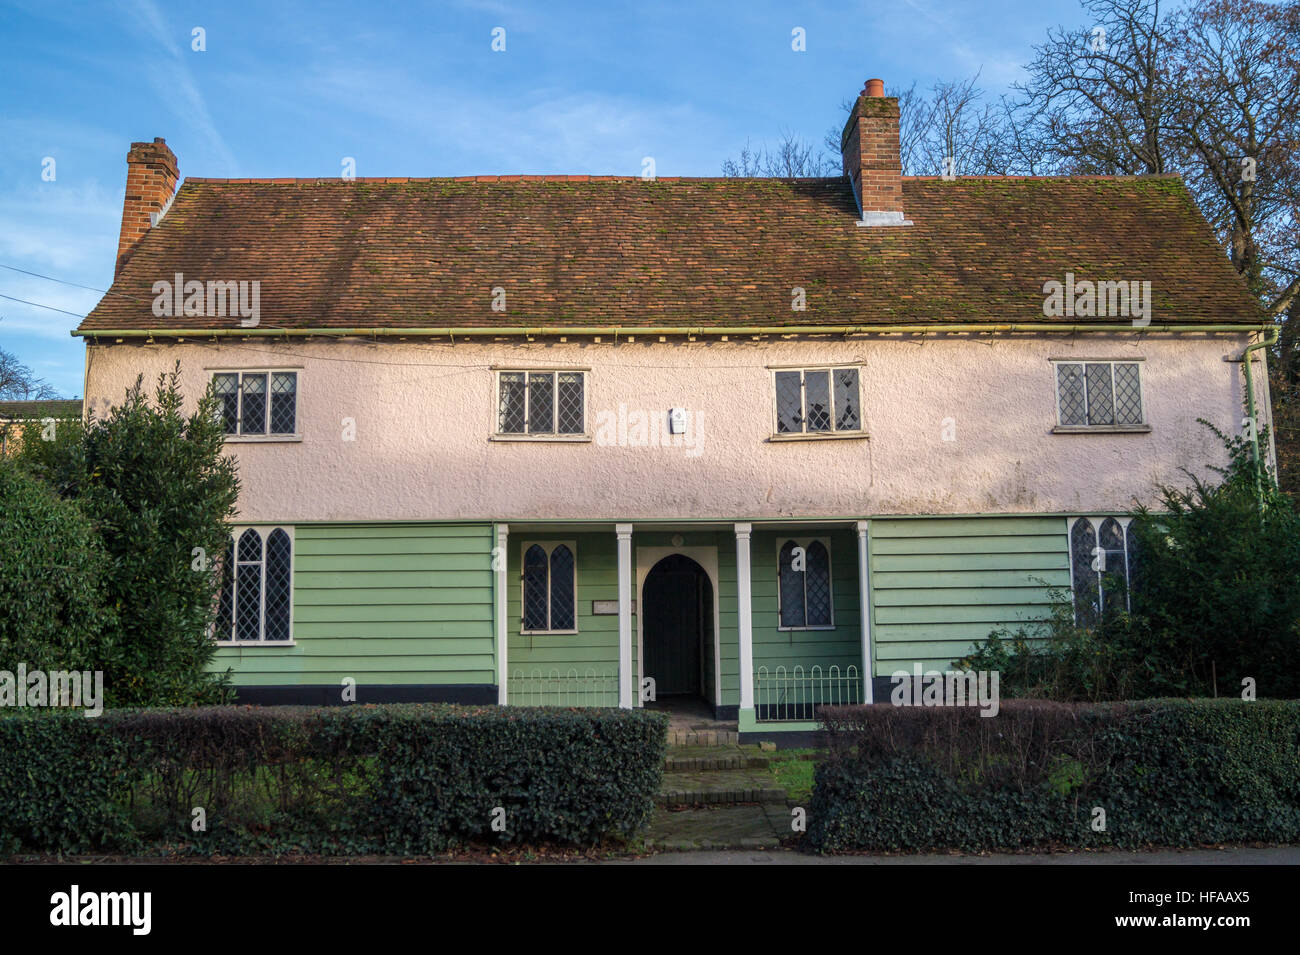 Hermitage Cottage, Georgian House, High Street, Chipping Ongar, Essex, England Stockfoto